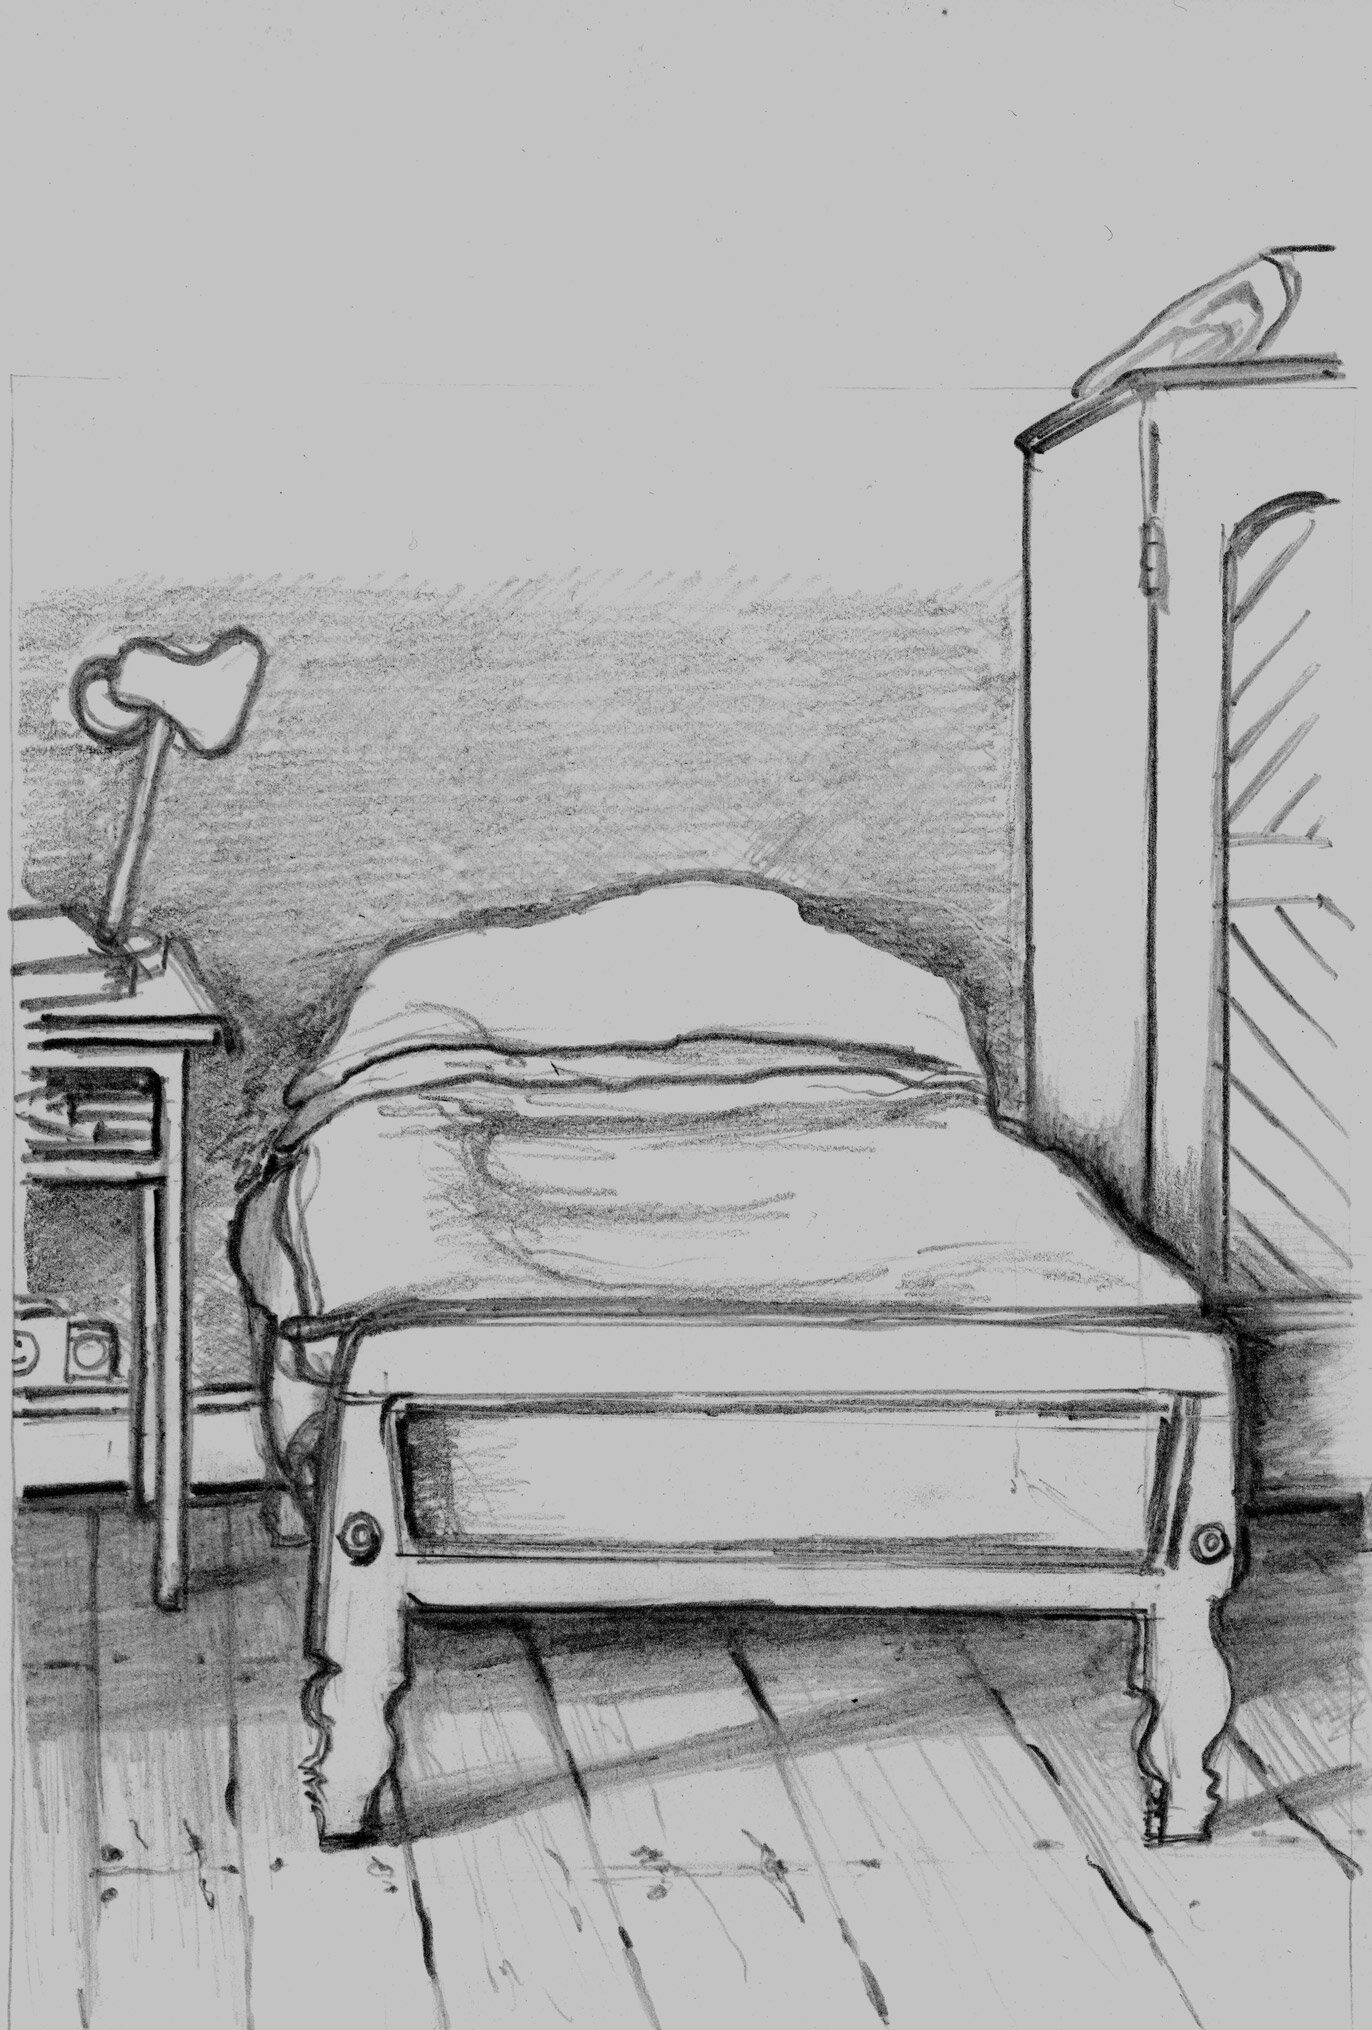   Kalimpong India Aunty Jean’s Old Room at DGH  2010 Pencil on paper 6.5x4.25 inches 